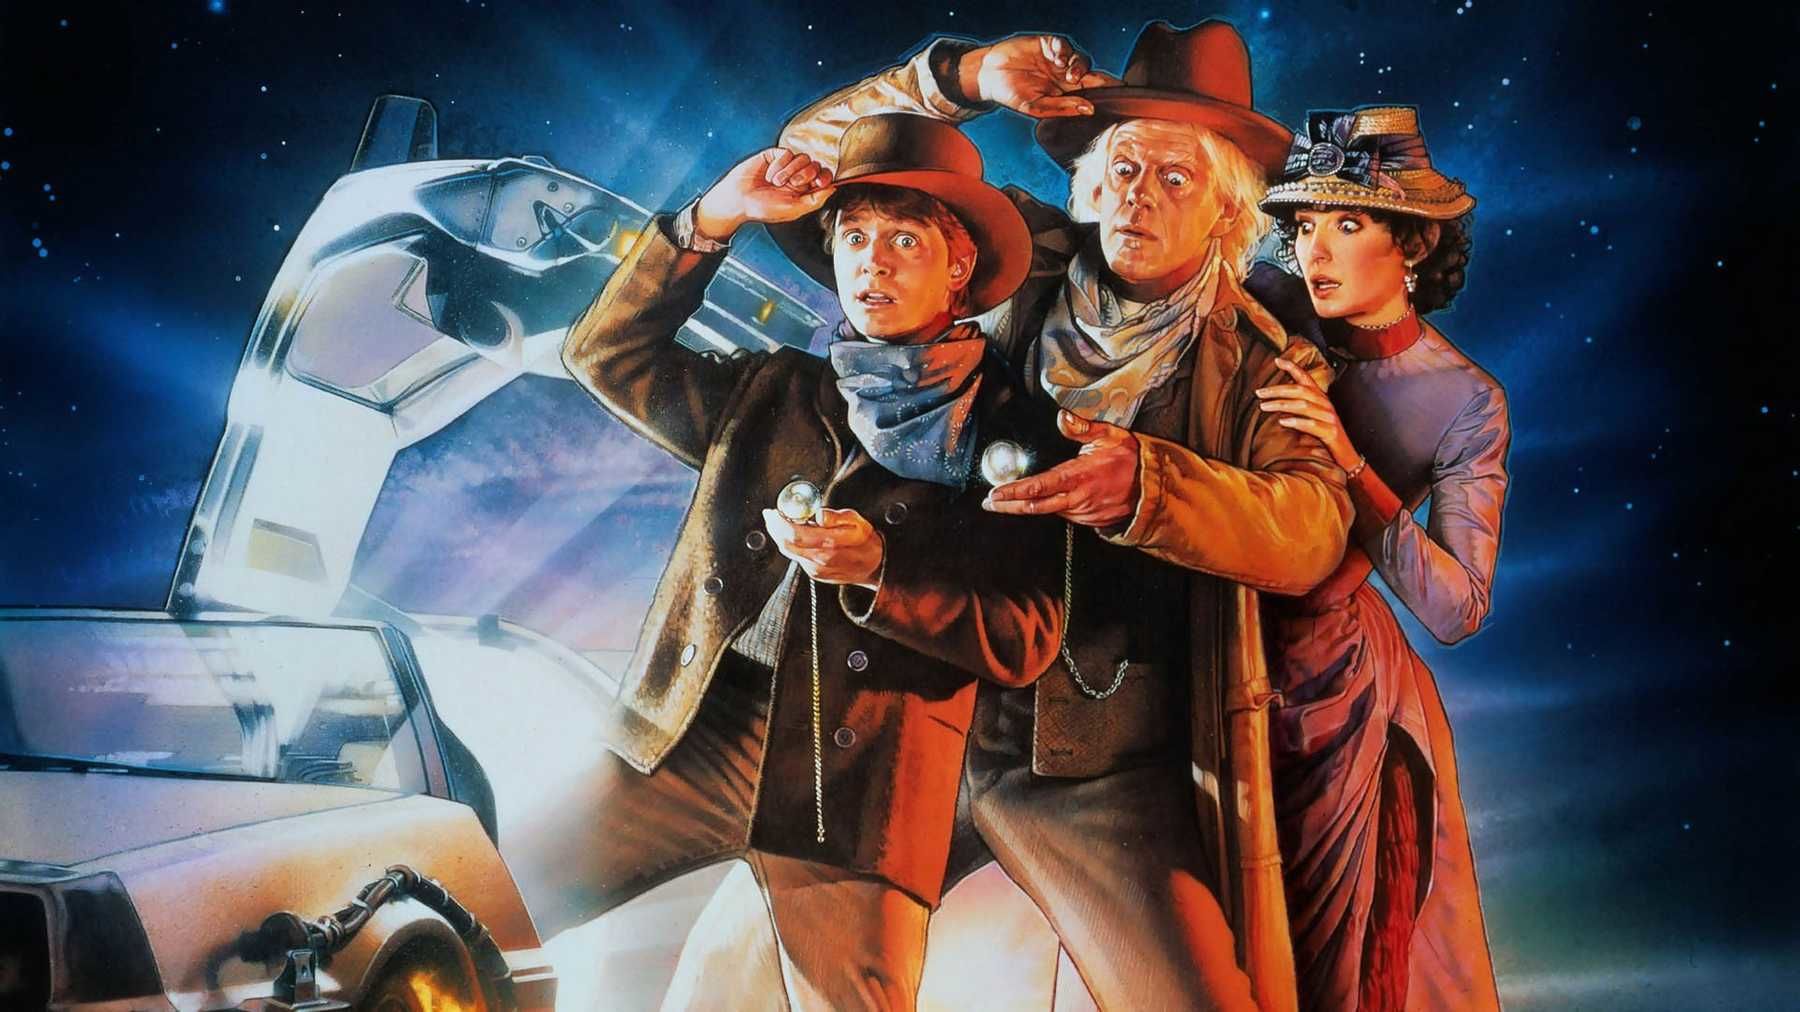 https://www.syfy.com/sites/syfy/files/2020/05/back-to-the-future-iii.jpg